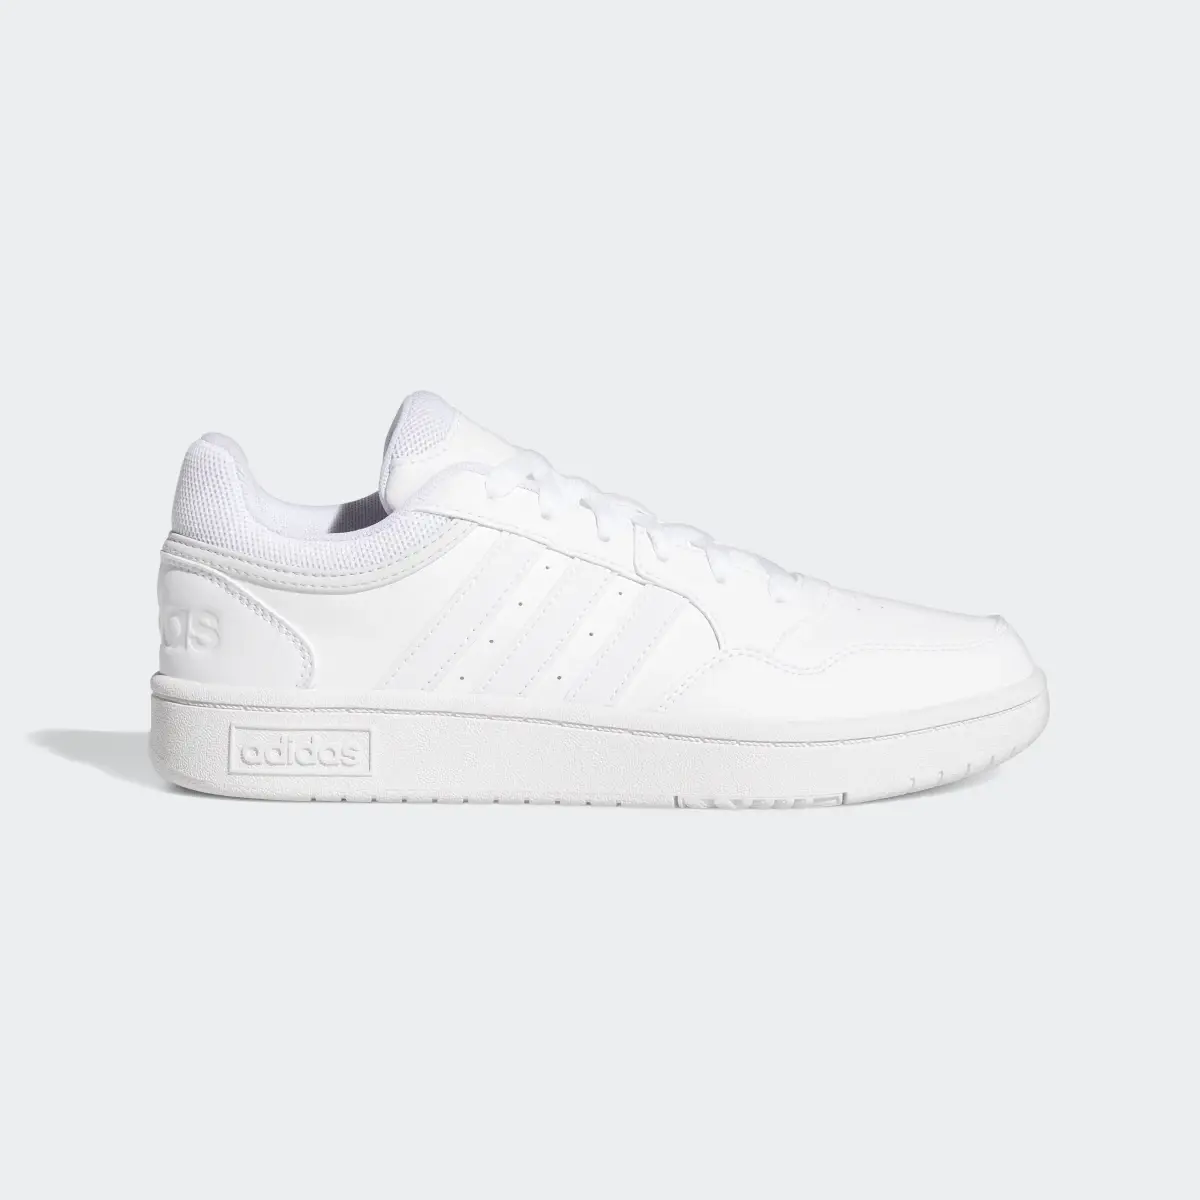 Adidas Hoops 3.0 Low Classic Schuh. 2